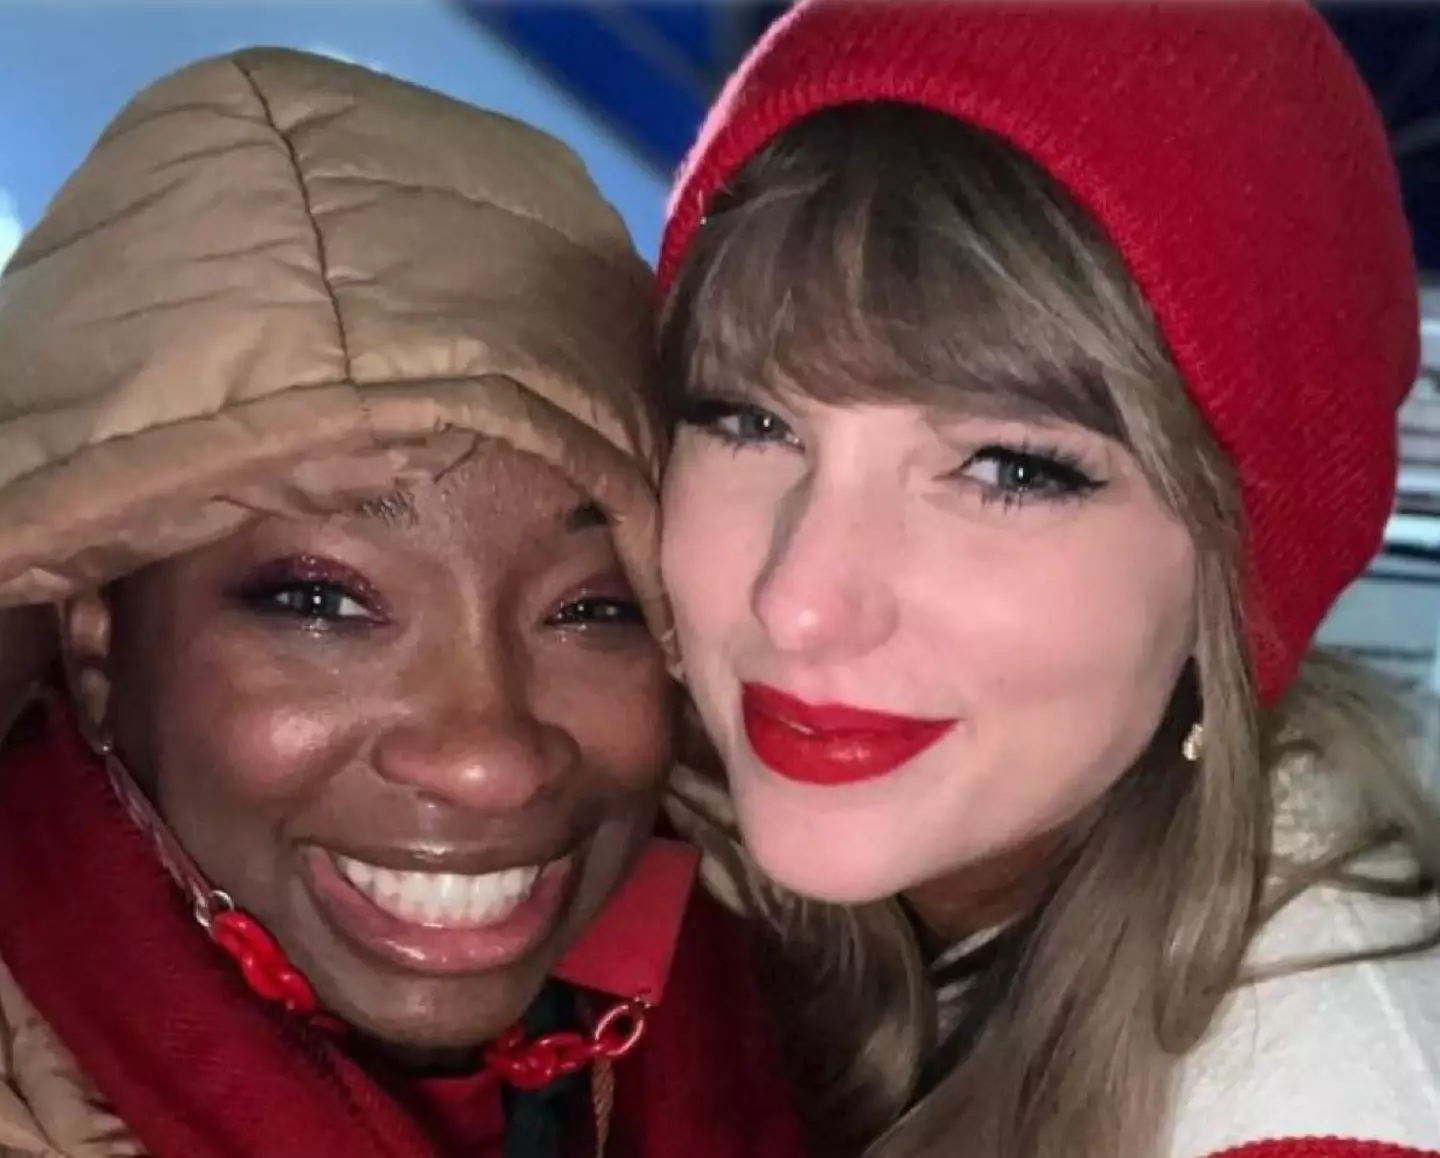 Jerris Rainey couldn't refuse a picture with Taylor Swift.